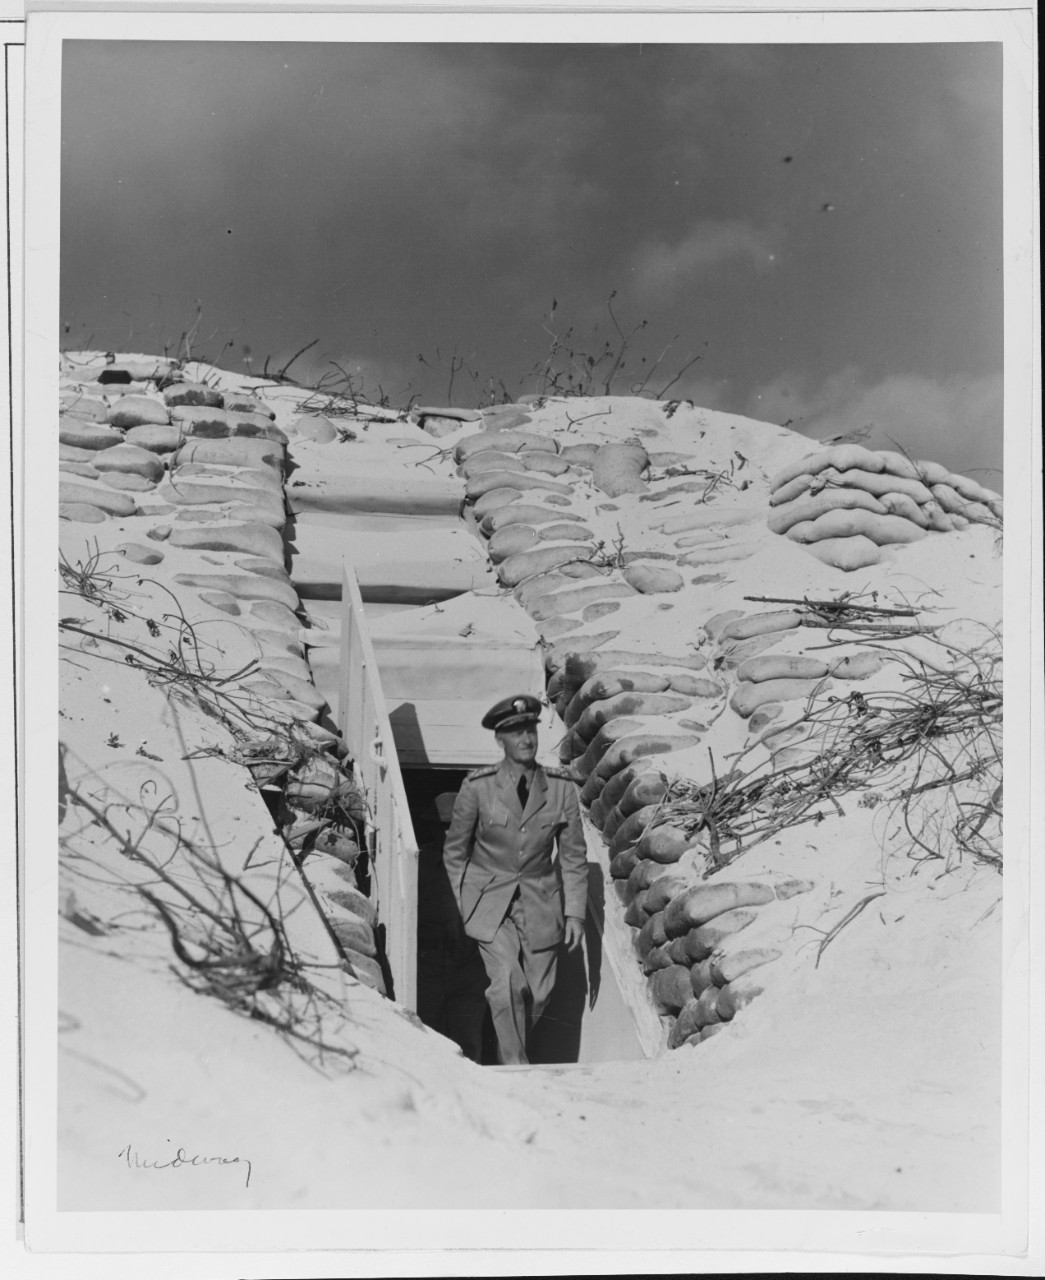 Admiral Chester W. Nimitz, USN (CINCPAC) is shown in the Doorway of a Bunker